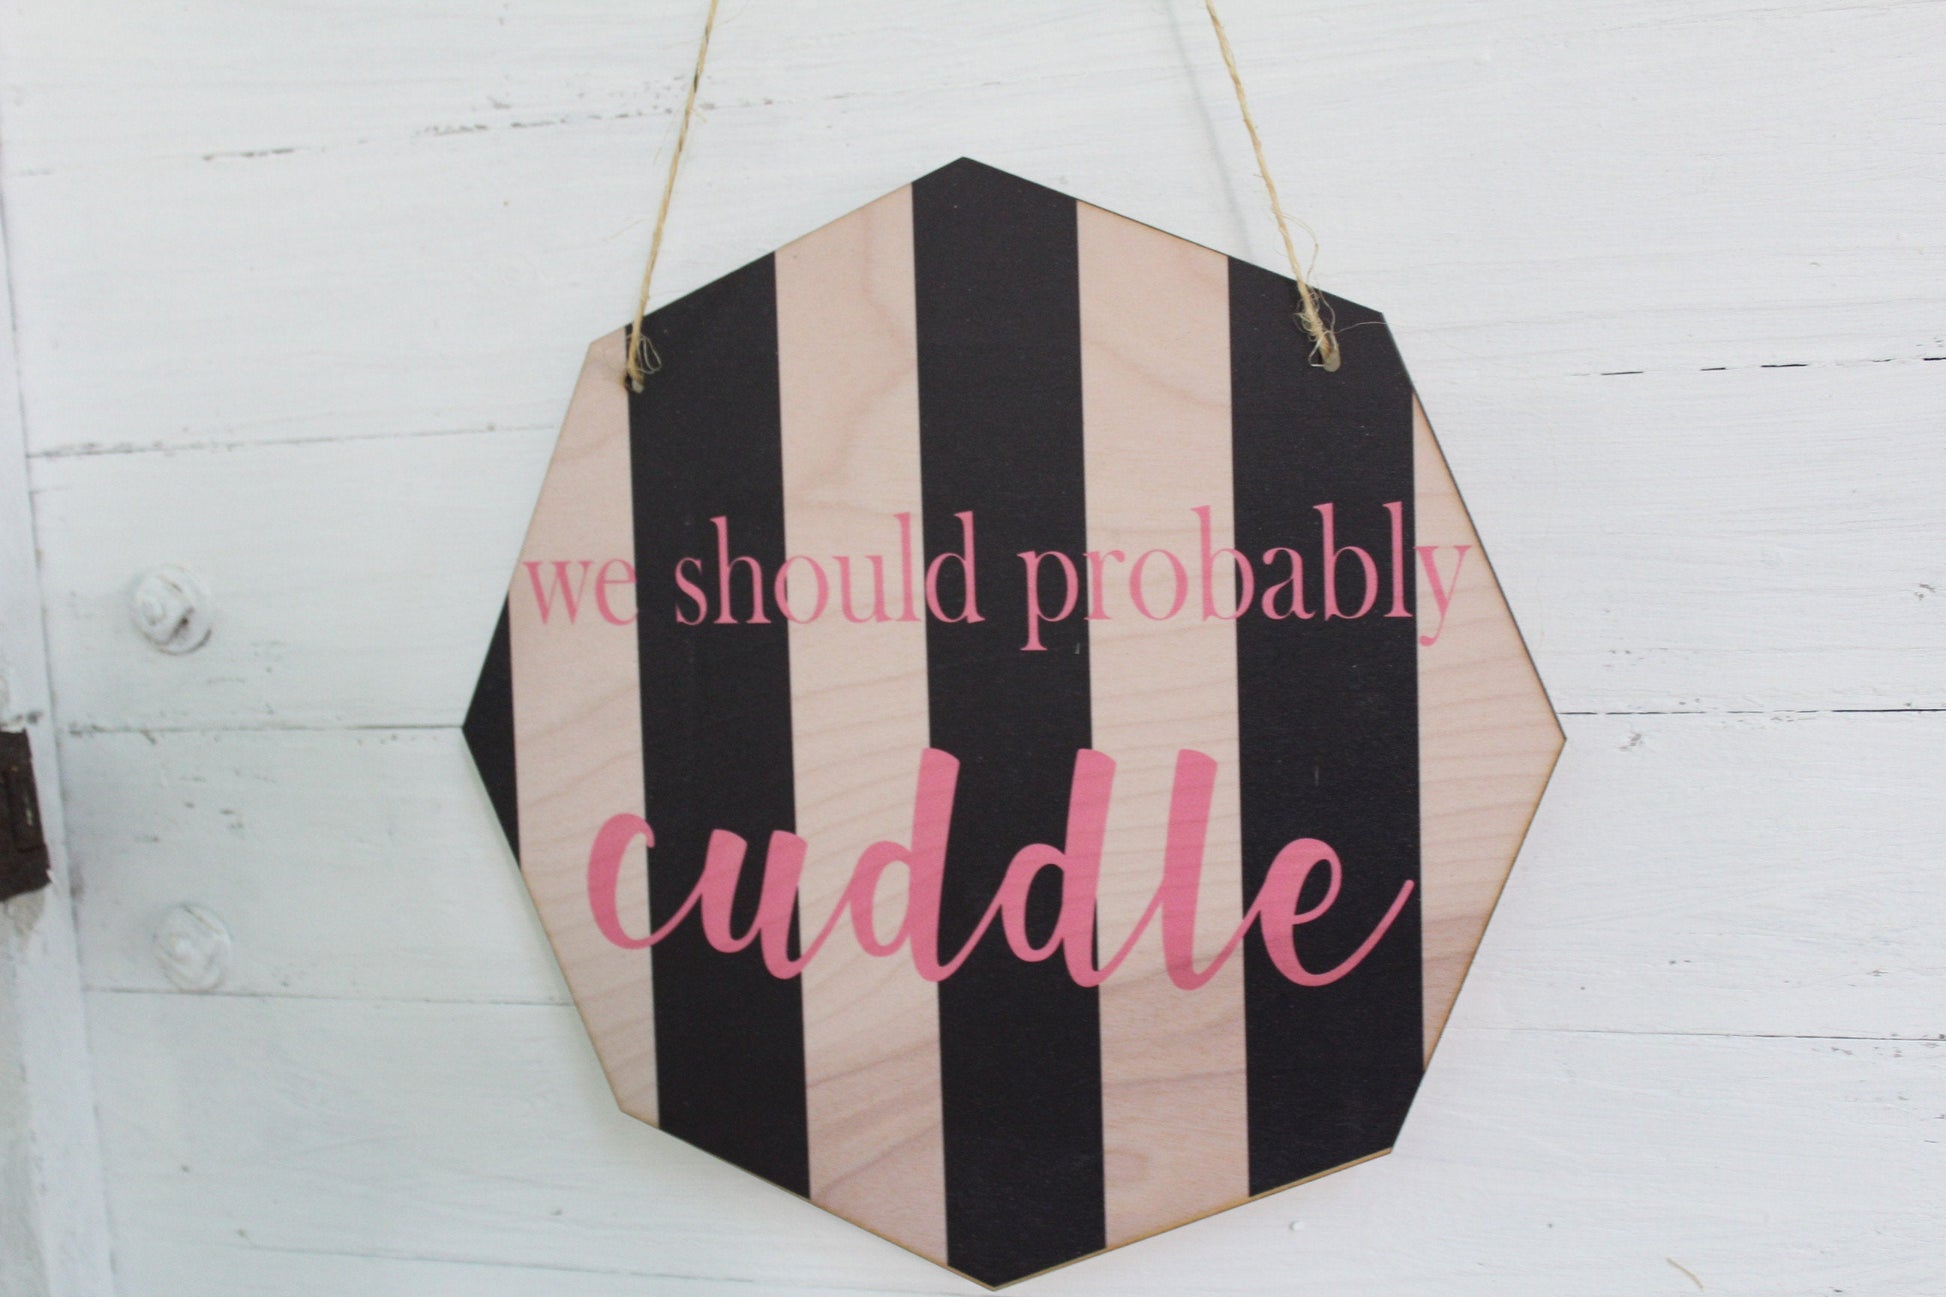 We Should Probably Cuddle Wall Hanging Black and Pink Stripe Shape Art Decoration Love Date Wood Sign Gift Couple Anniversary Gift